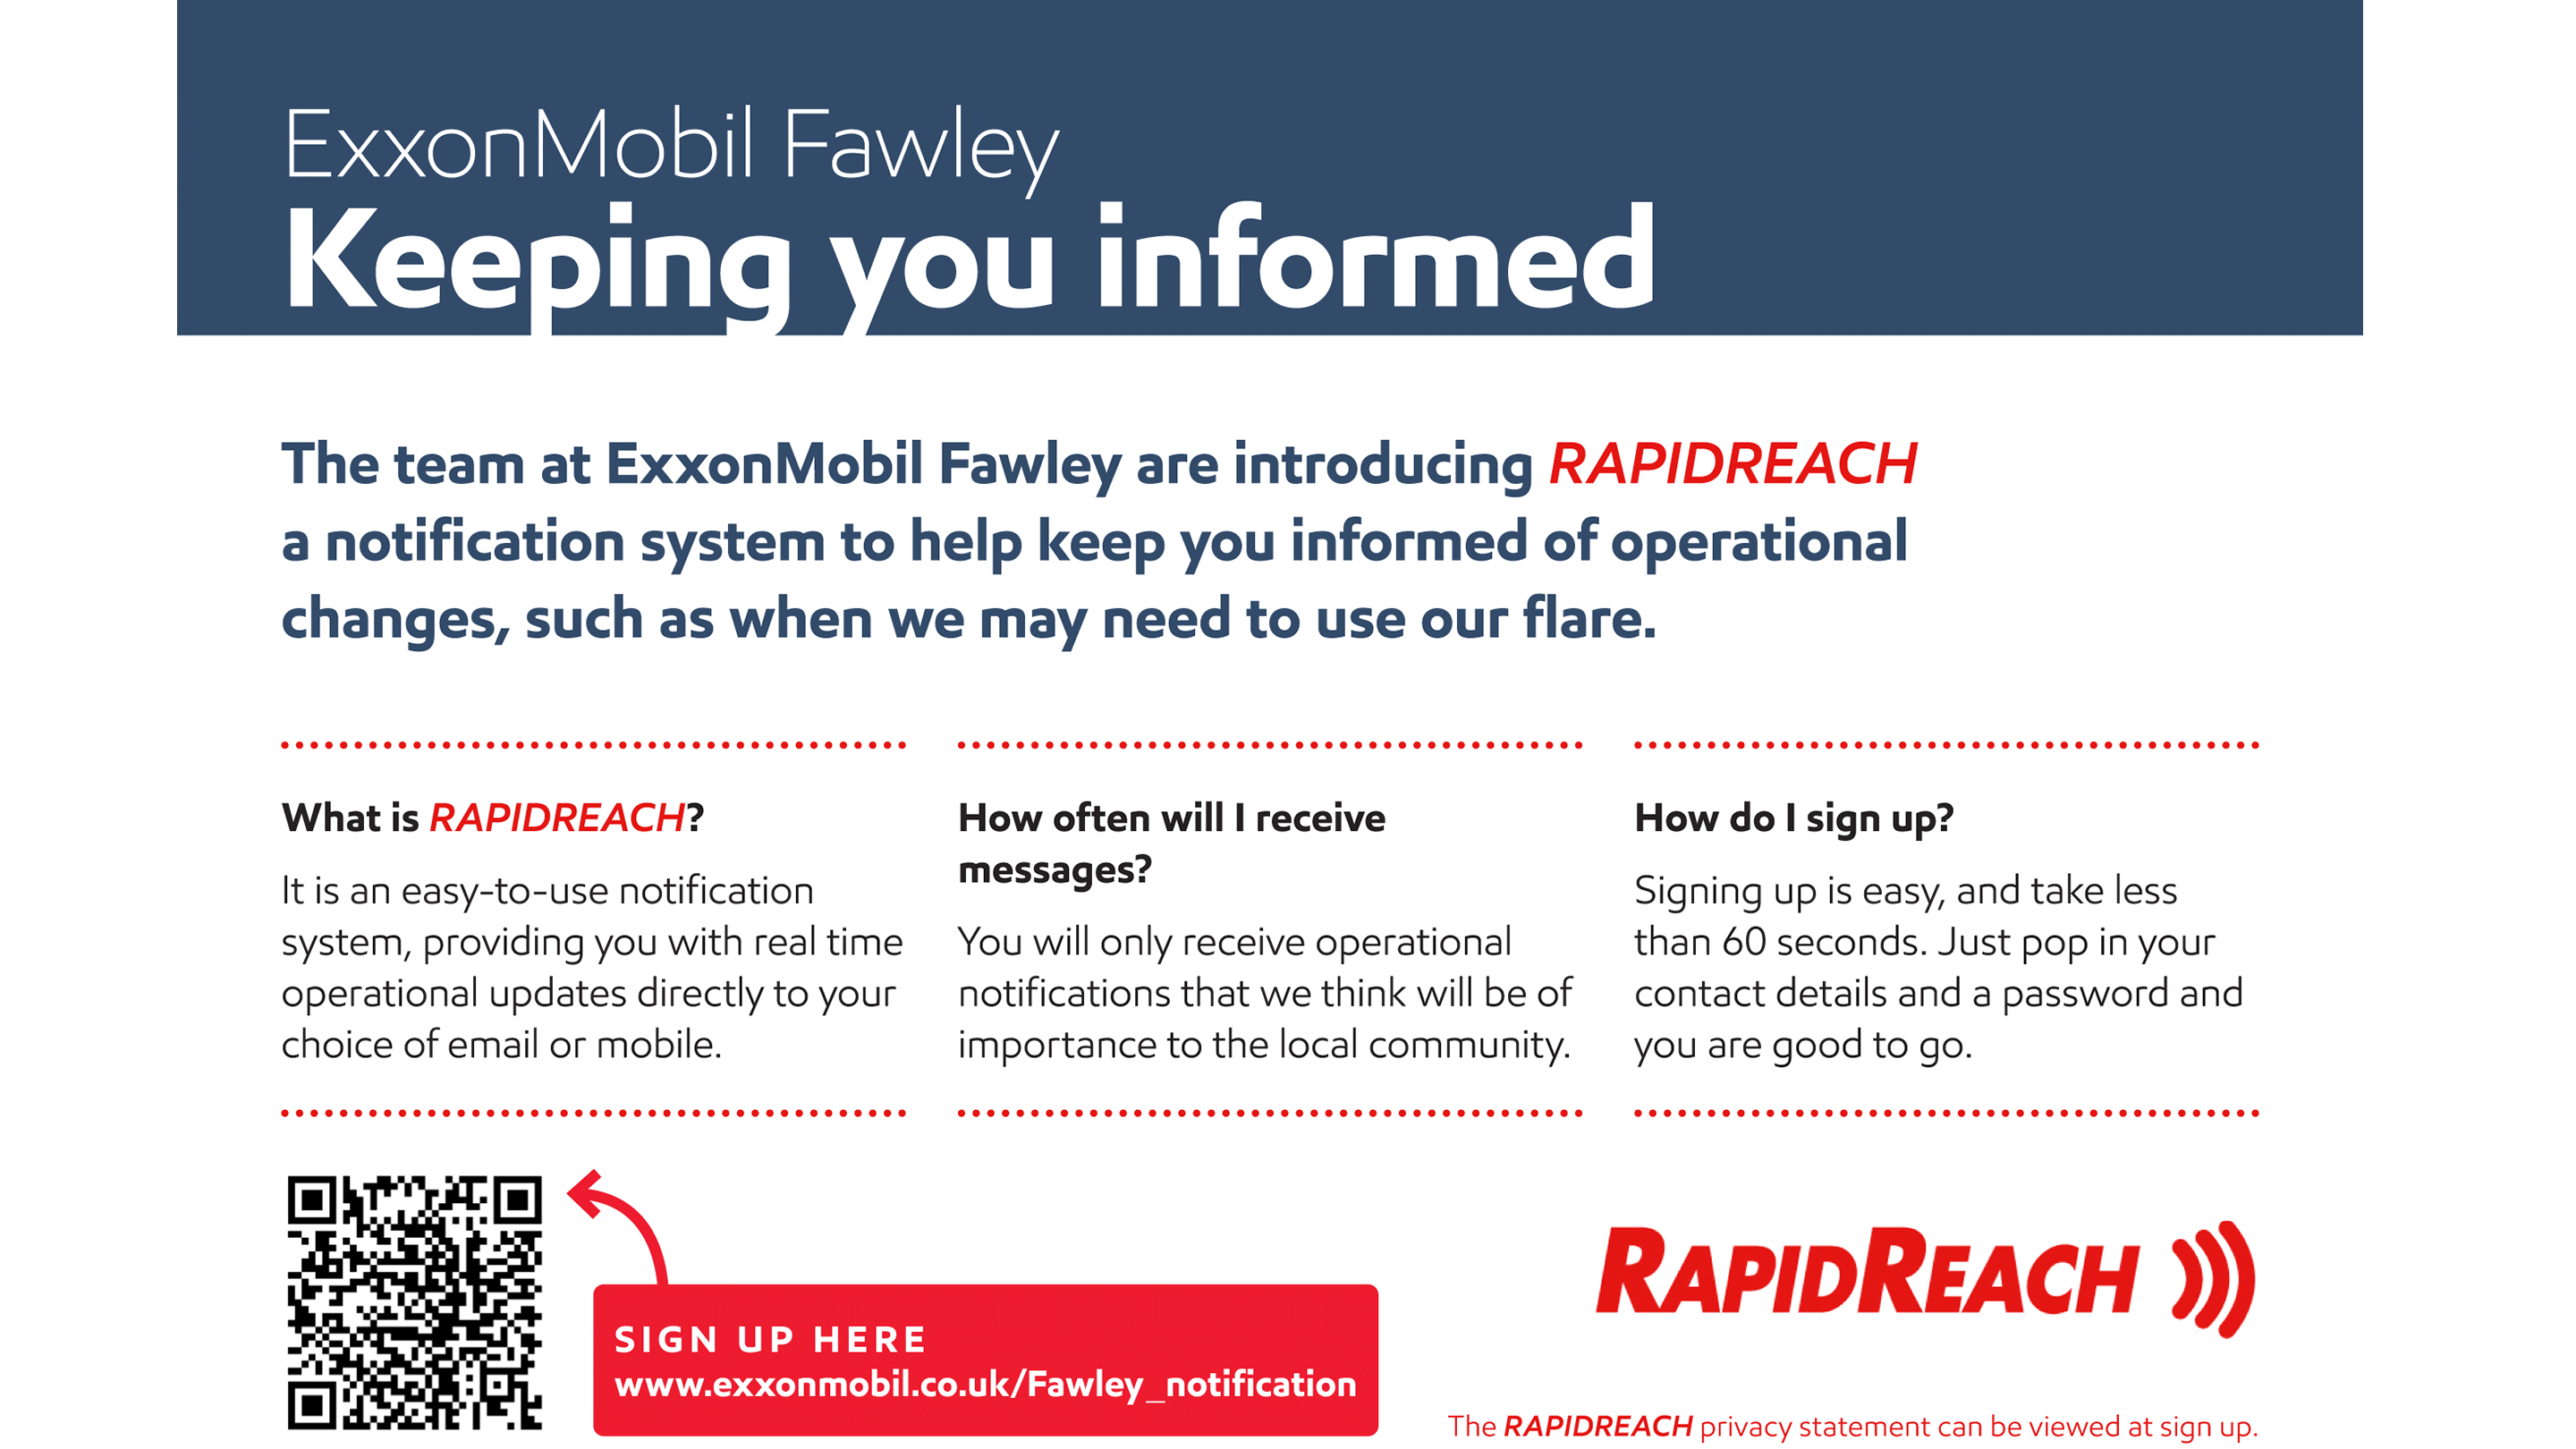 Fawley Site Launches 'RapidReach' Notifications